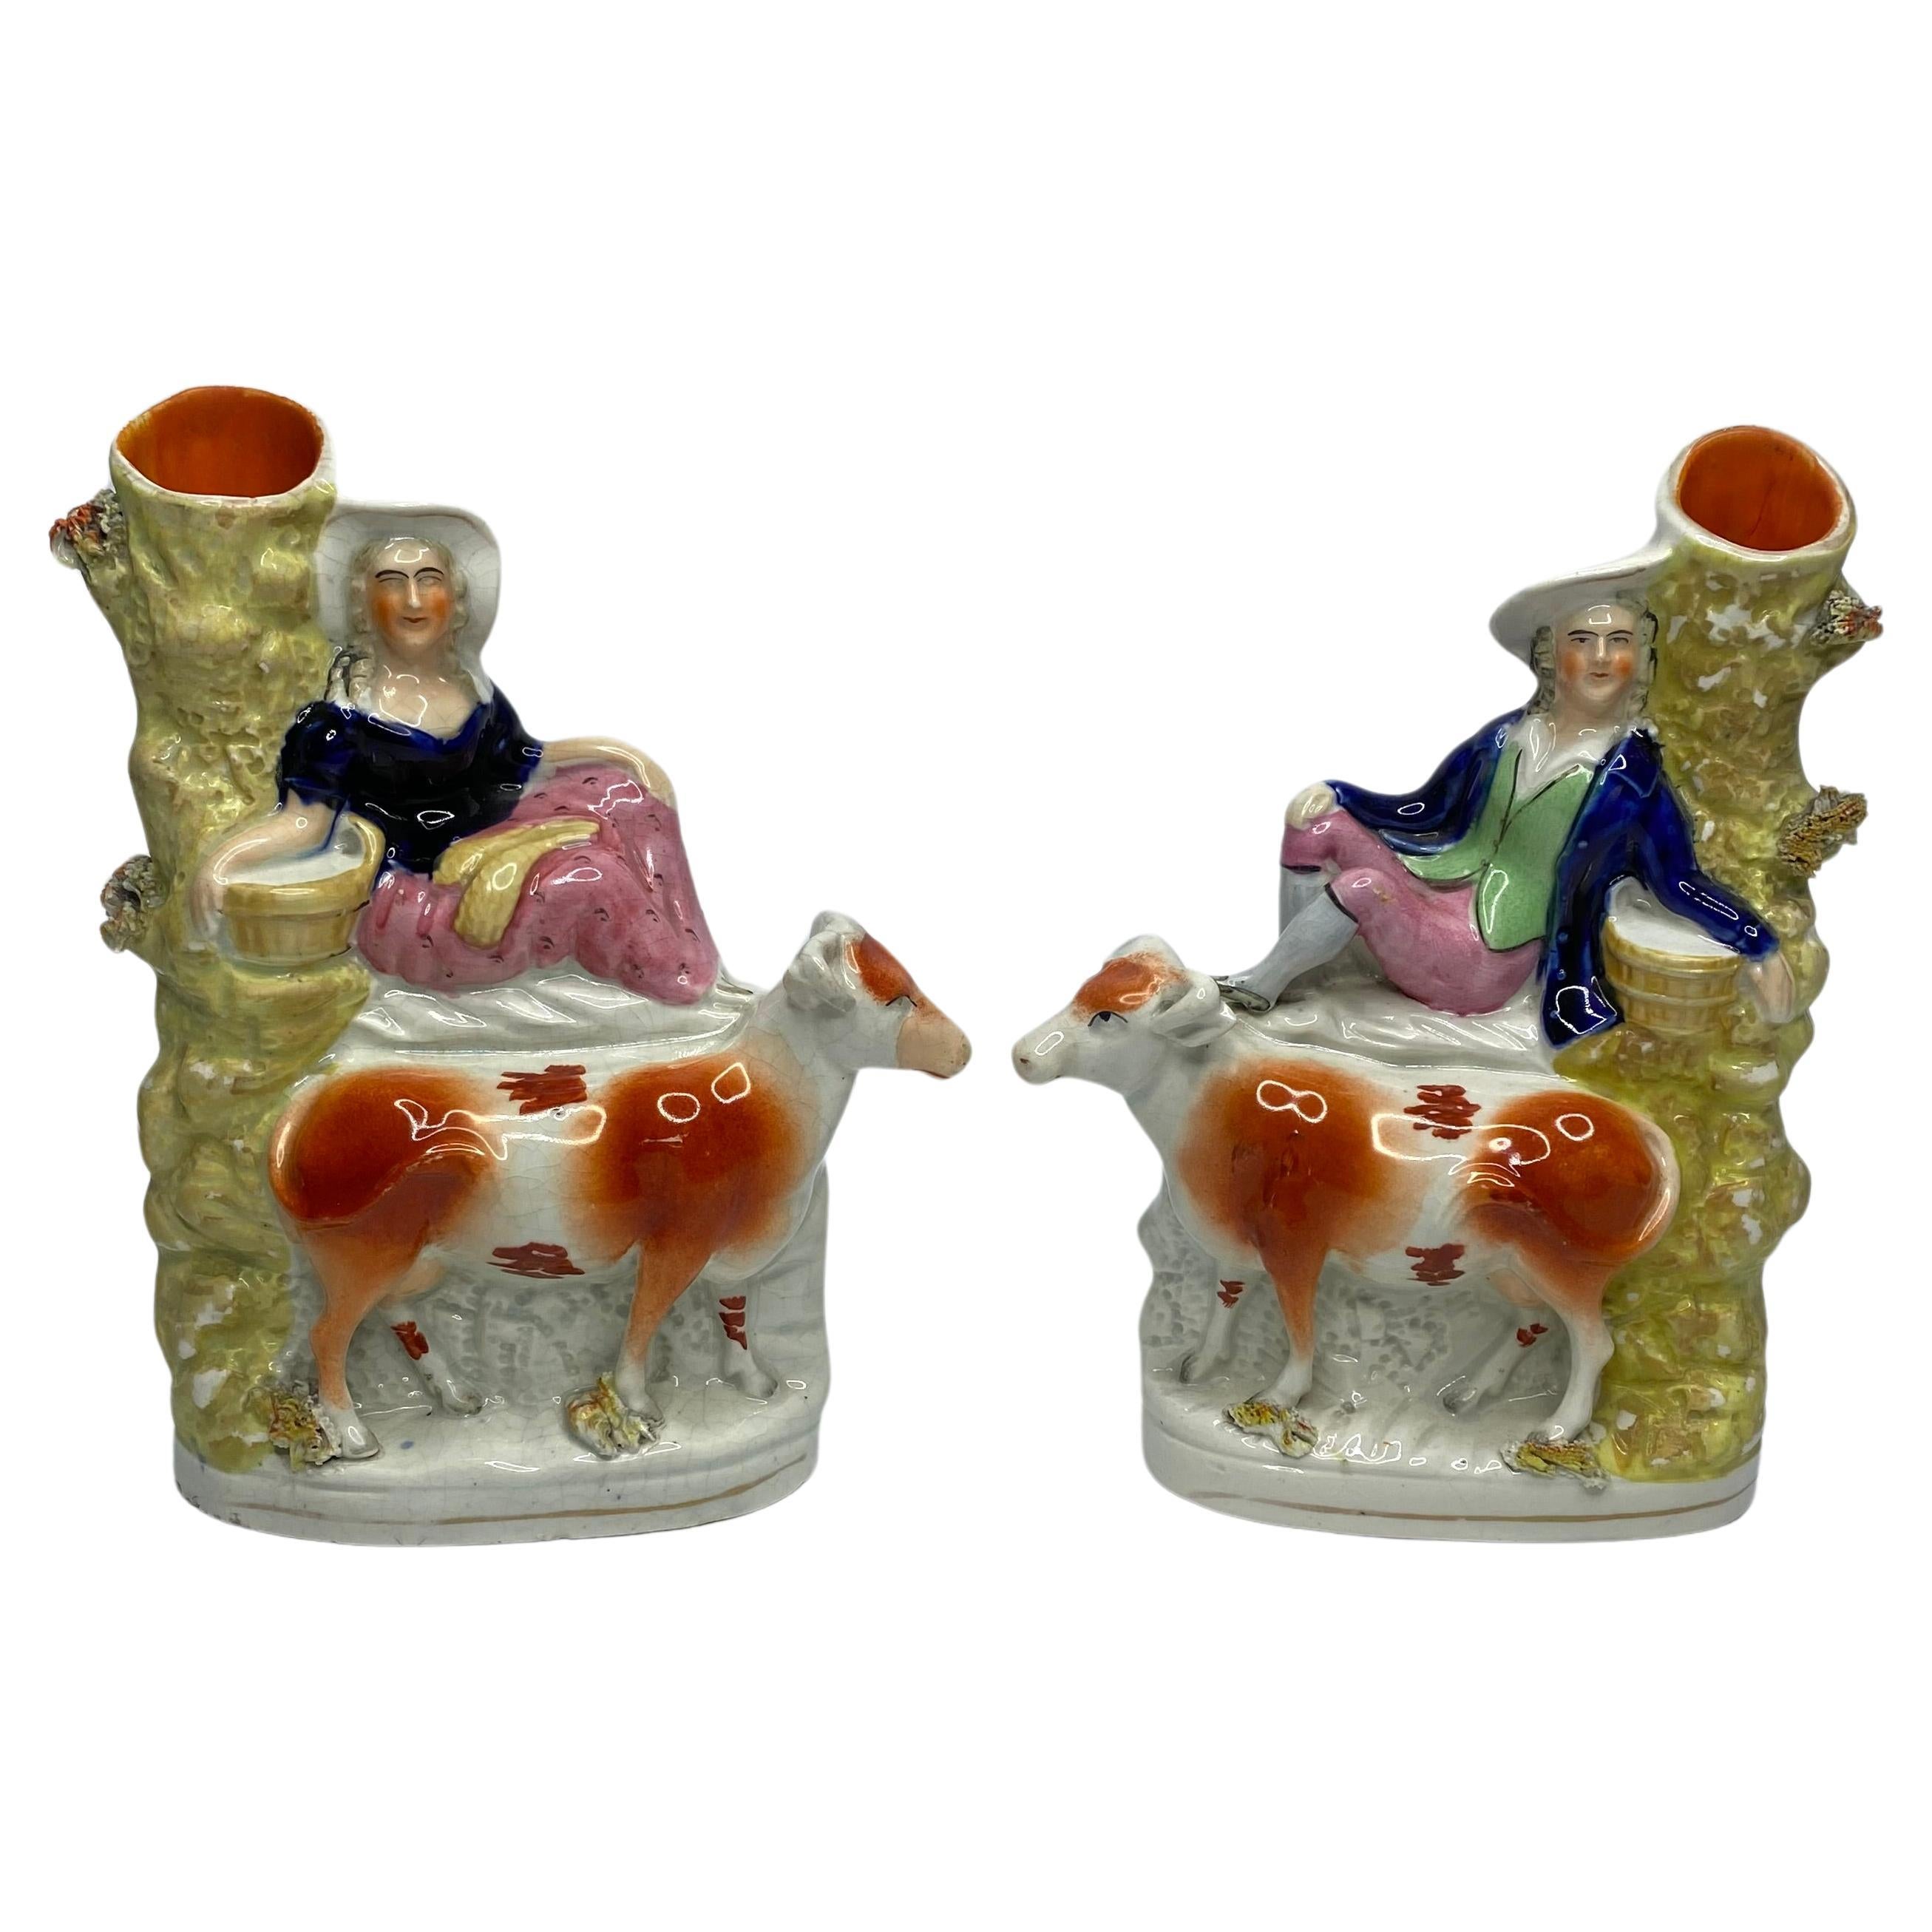 Staffordshire cow spill vases, c. 1860. For Sale